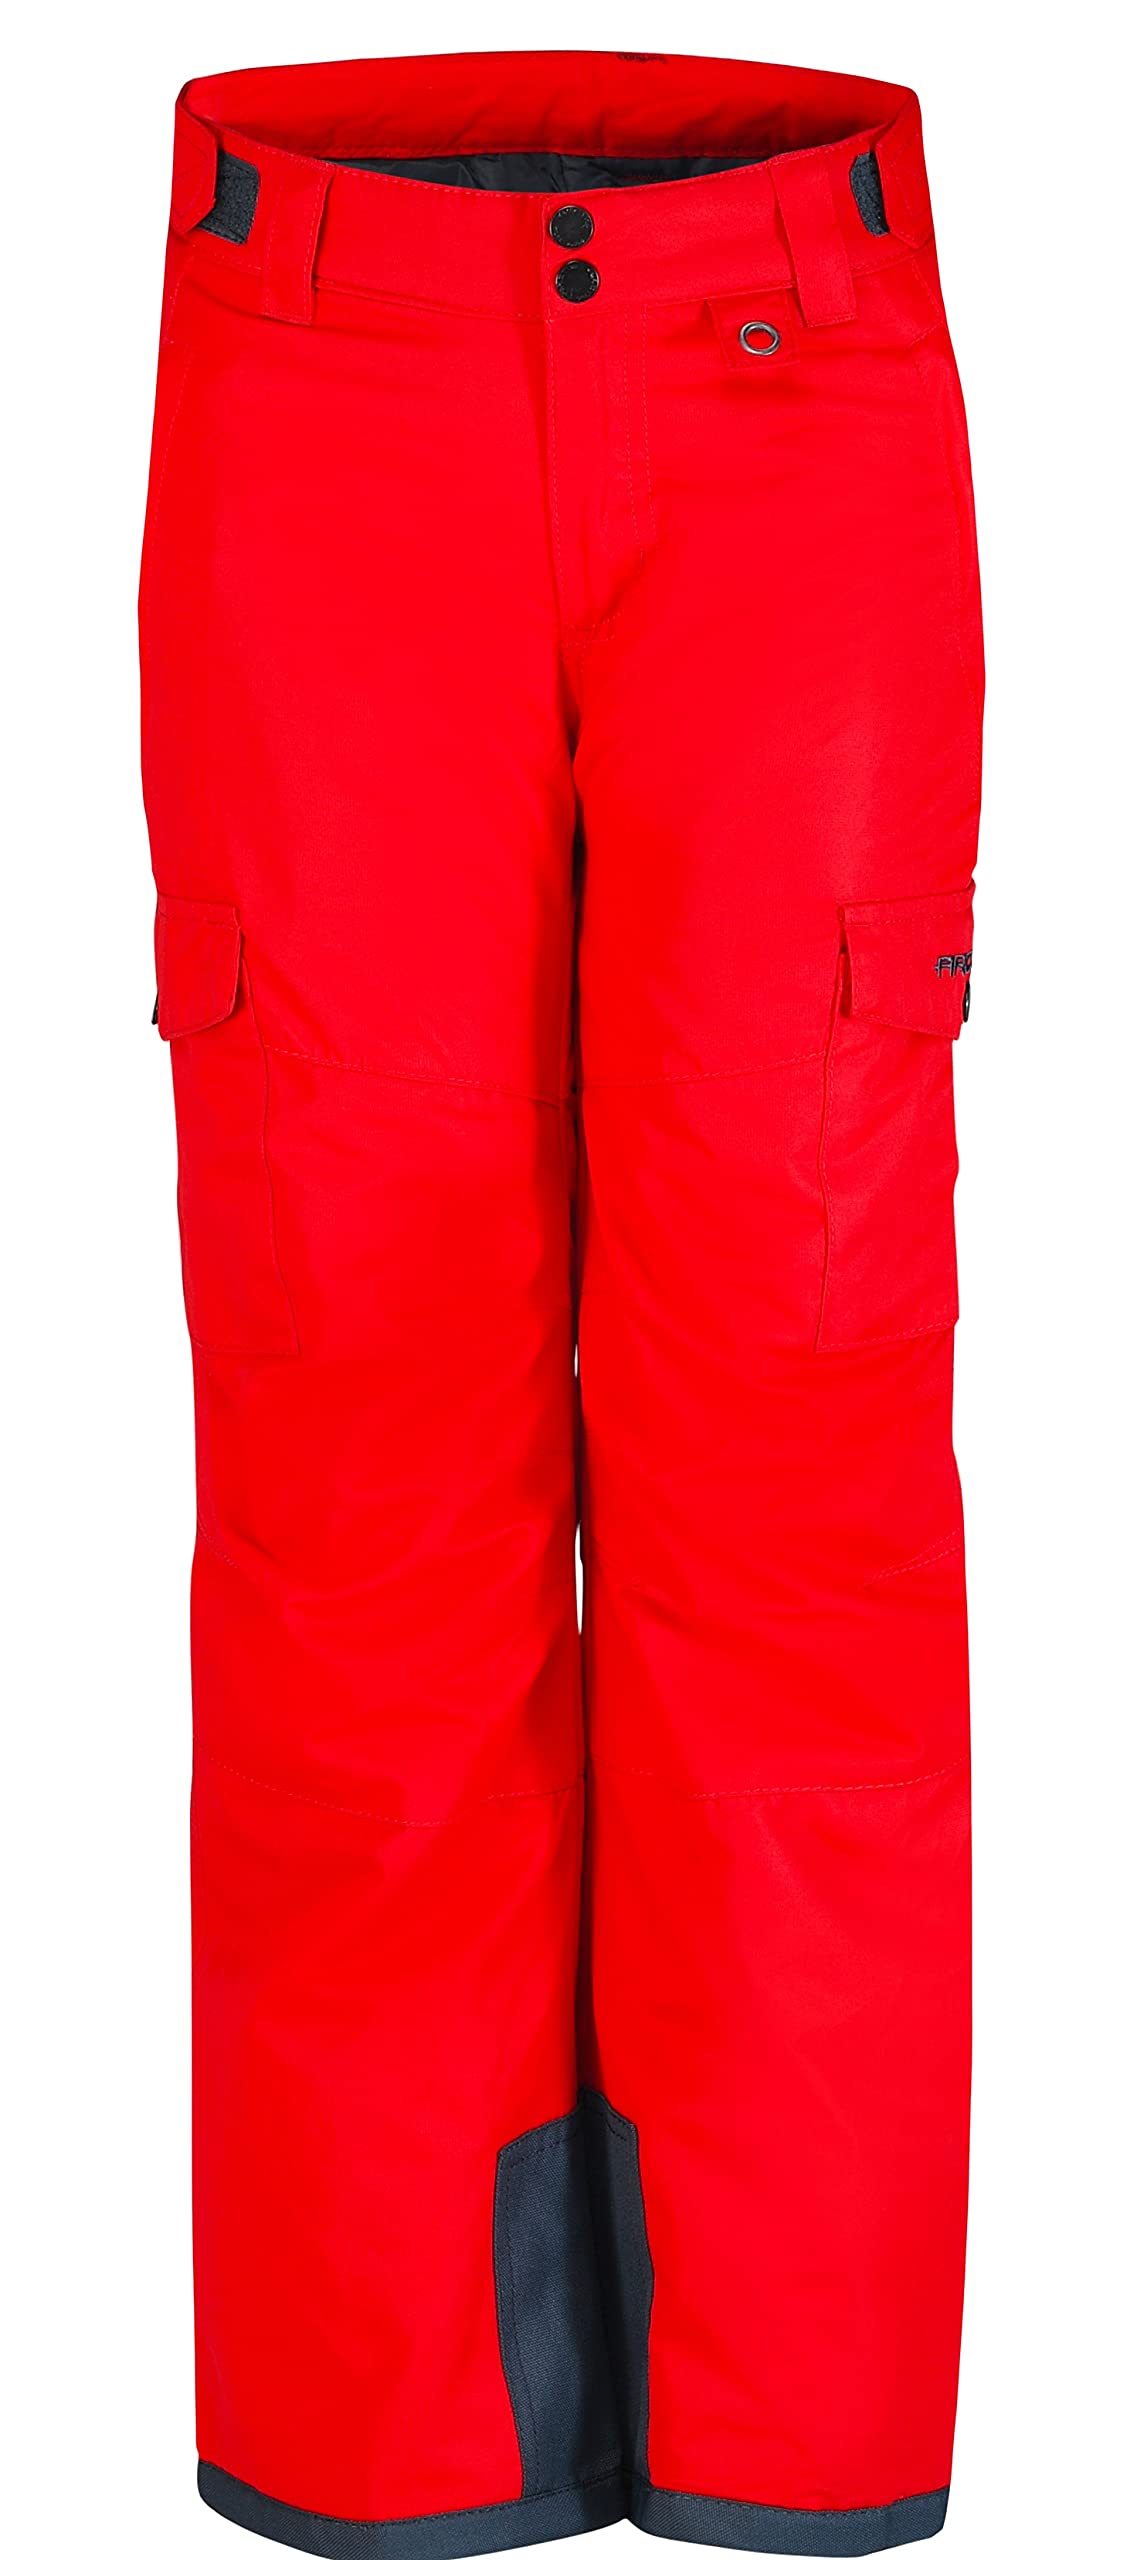 Arctix Kids Snow Sports Cargo Snow Pants With Articulated Knees, F1 Red, X-Small Husky